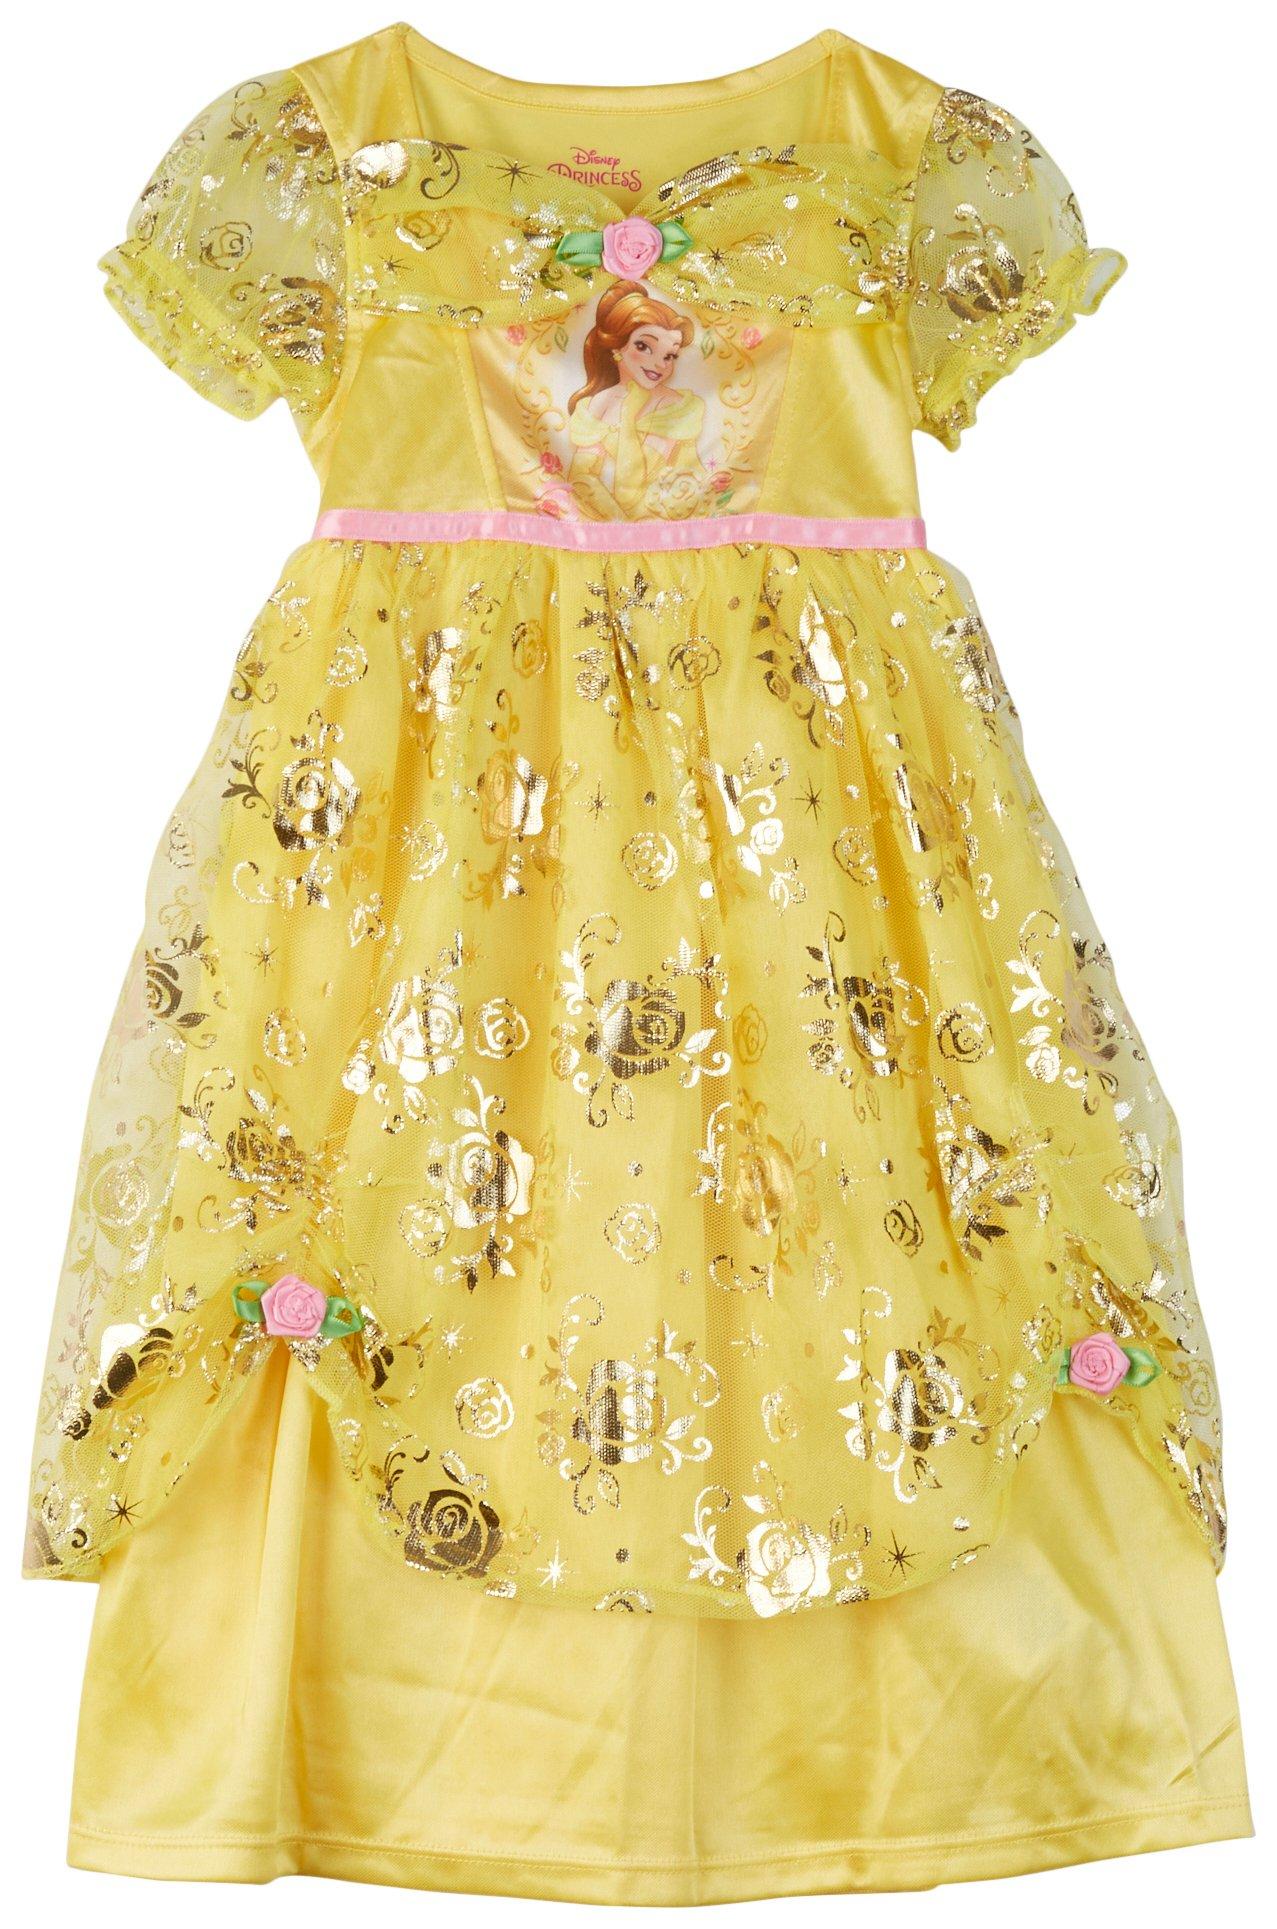 Toddler Girls Gorgeous Beauty And Beast Nightgown